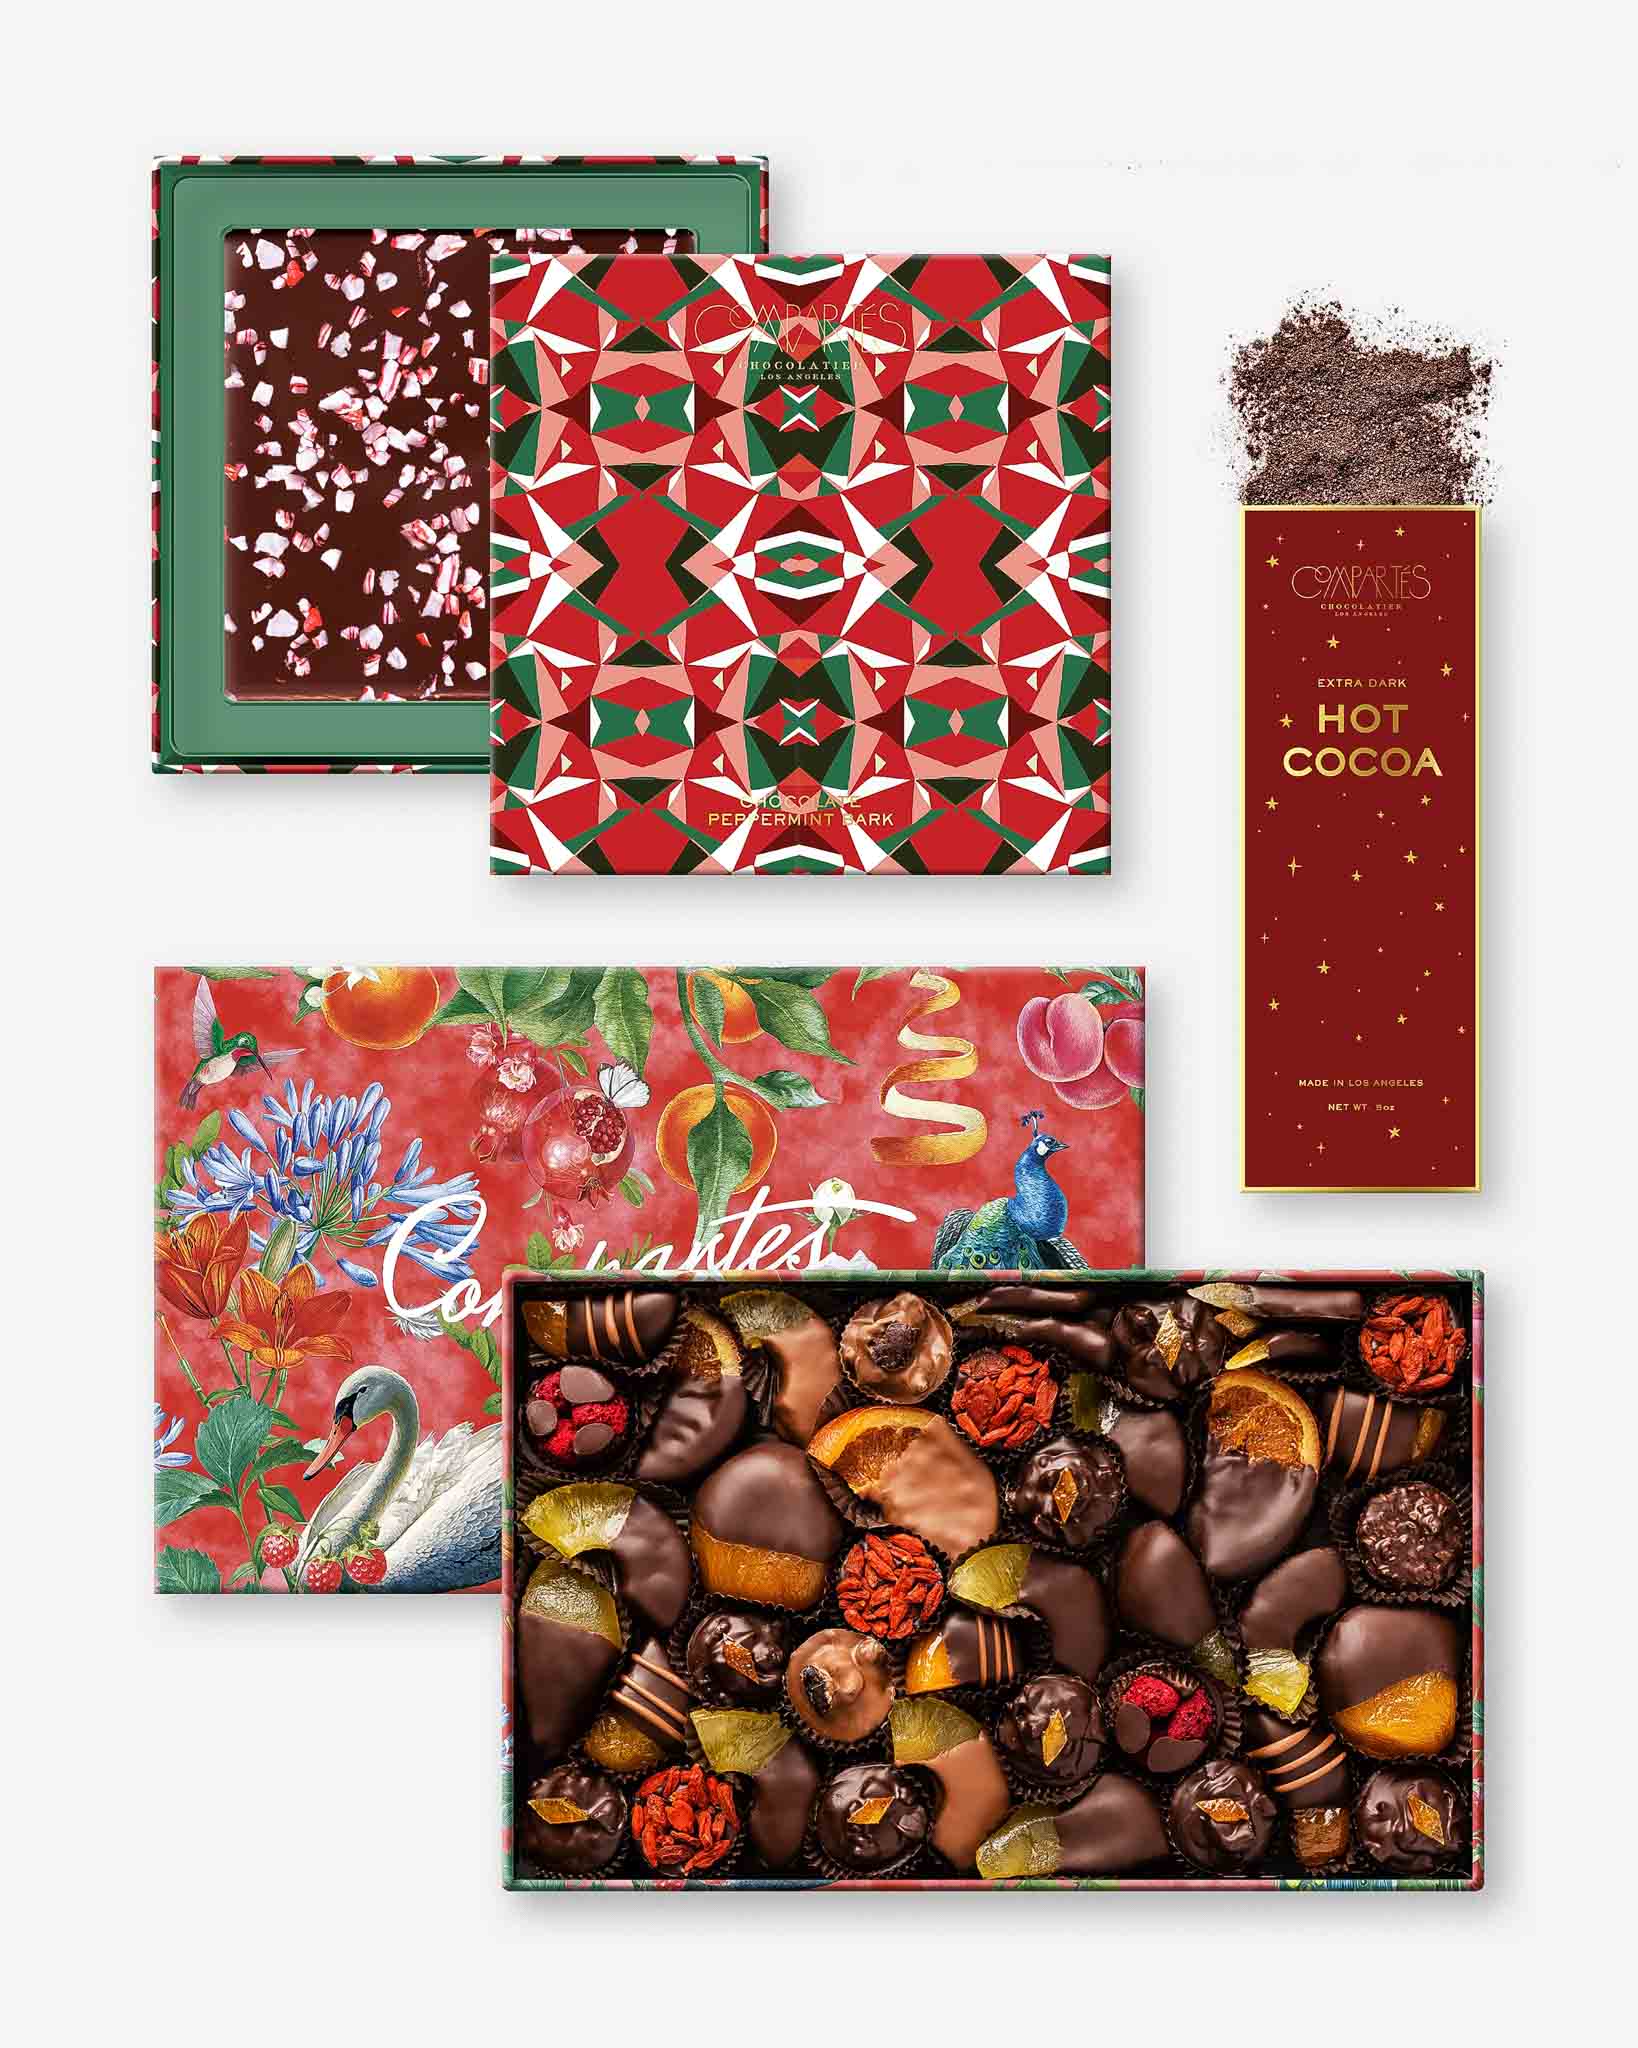 Luxury Chocolate Gifts - Holiday Chocolates Assortment - Fine Chocolates and Confections for Christmas